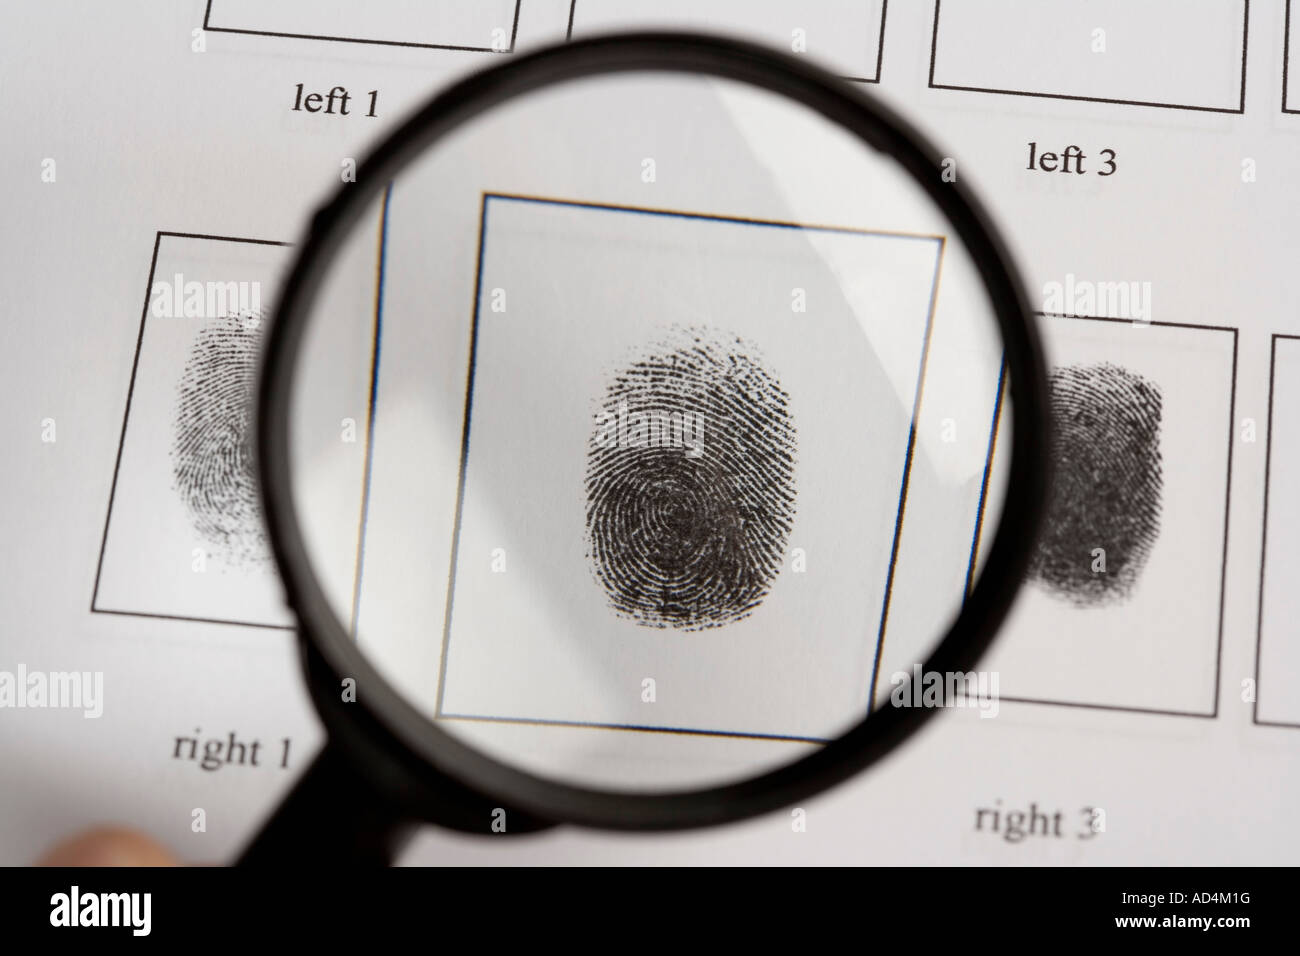 A magnifying glass above a fingerprint document Stock Photo